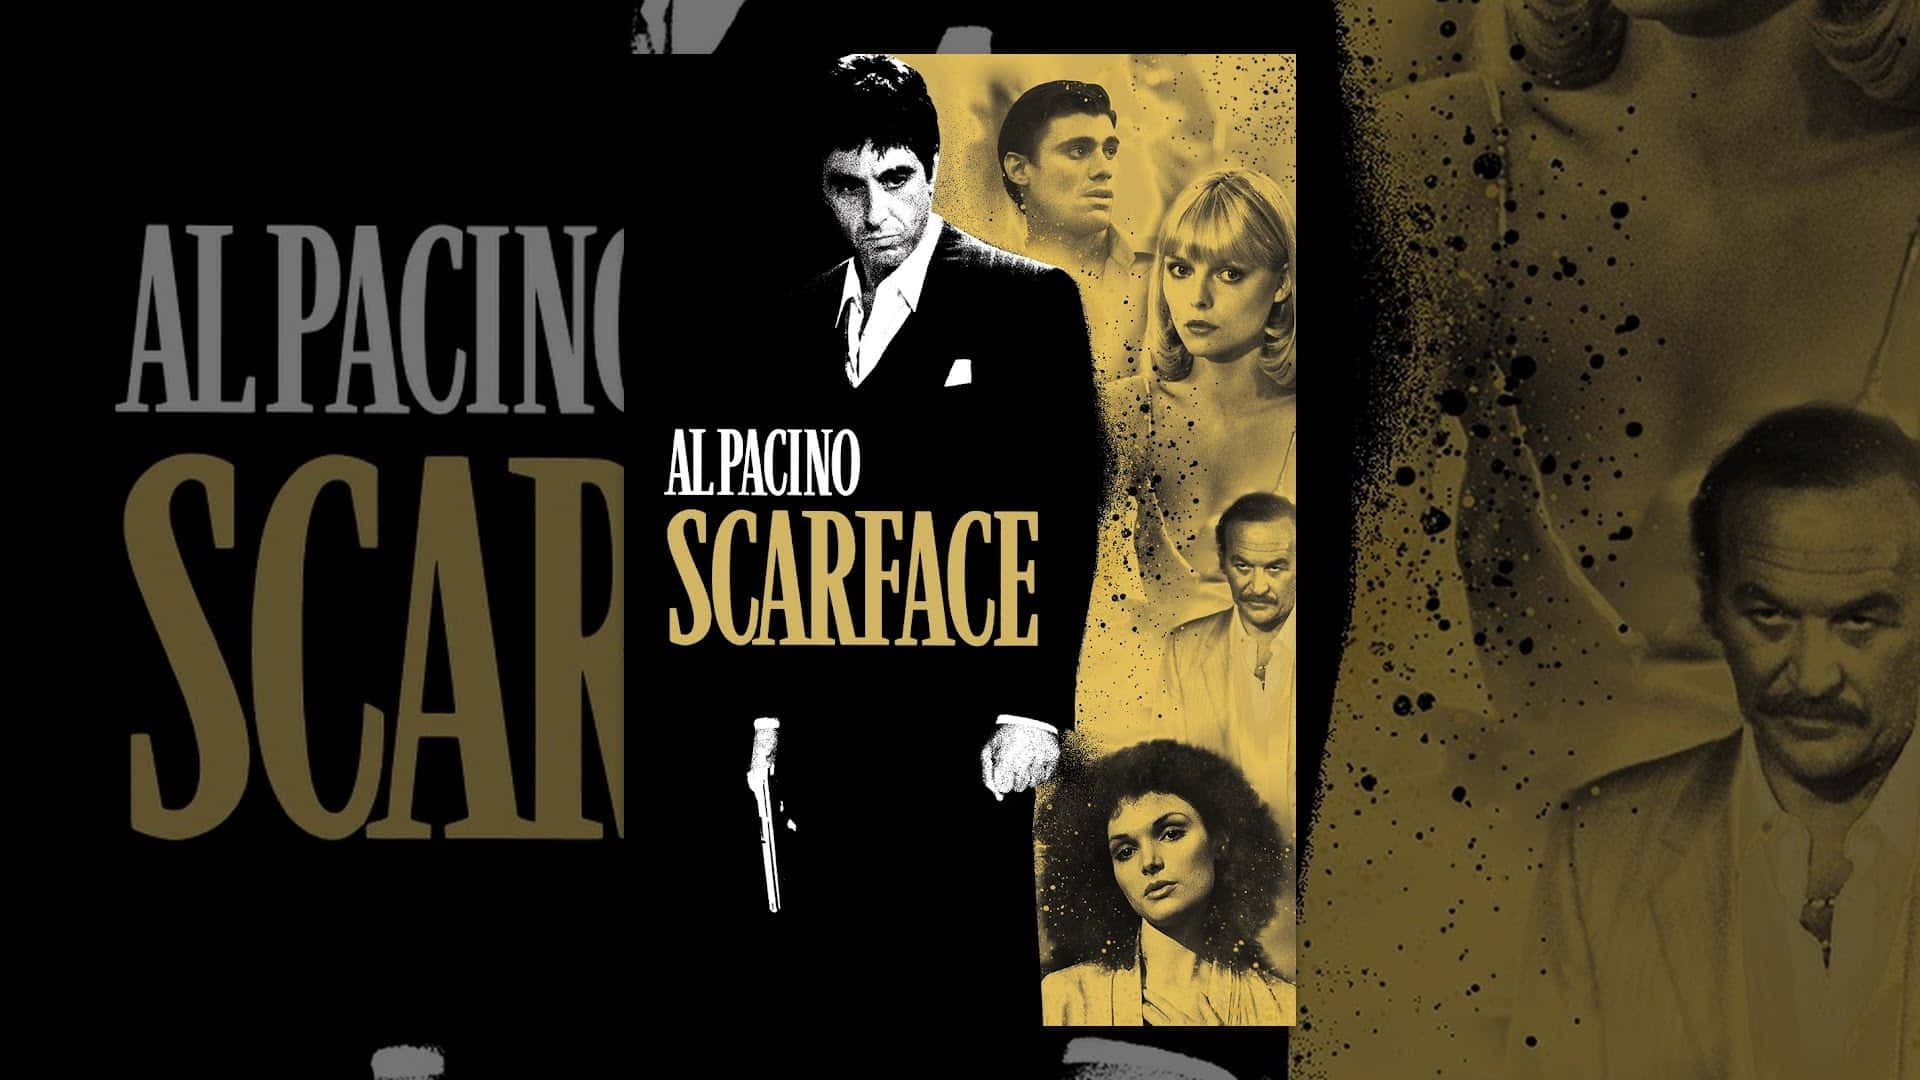 Scarface Tony Montana: The Wild And Reckless Anti-hero Background